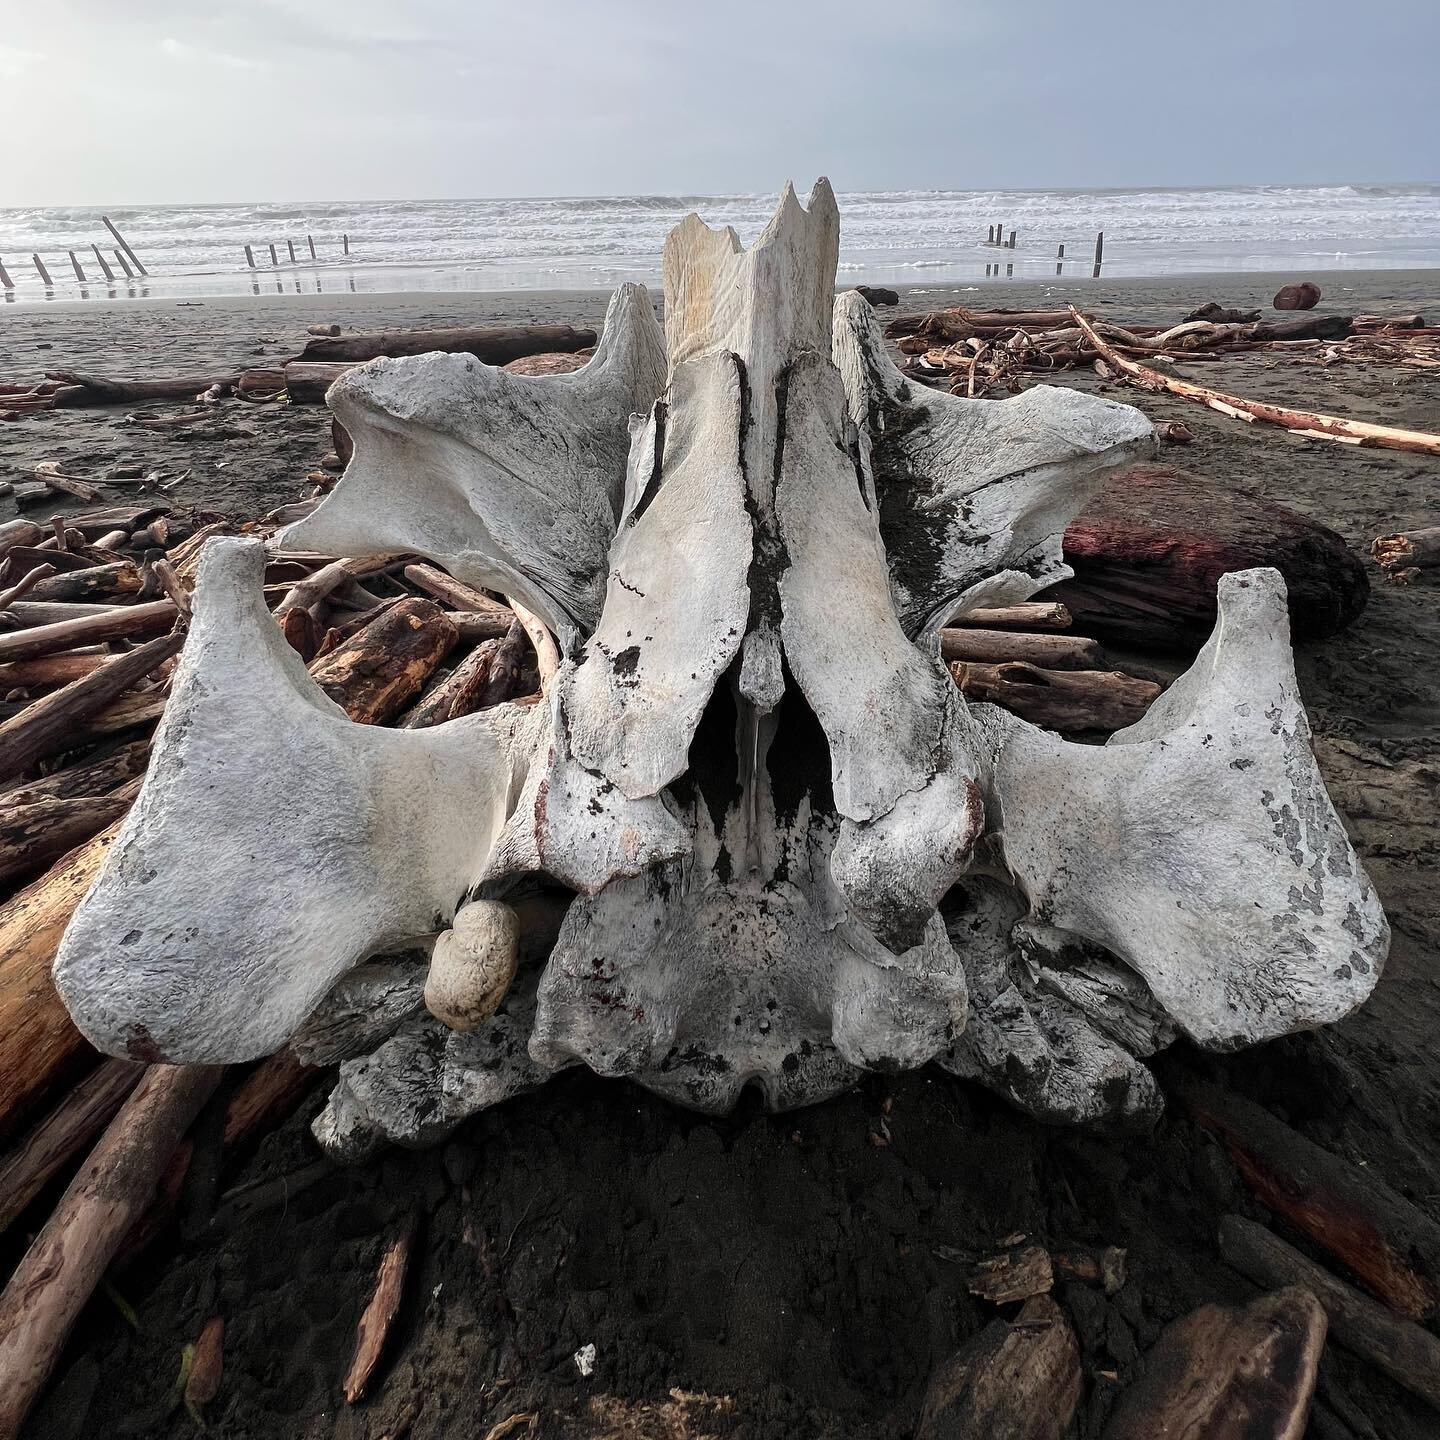 UPDATE! The bone has been identified as the brain case of a gray whale 🐋 

The Bay Area storm washed up what I believe is a whale&rsquo;s cervical vertebrae on the shore of Fort Funston, SF. Poignant representation of the power of nature. @sfchronic